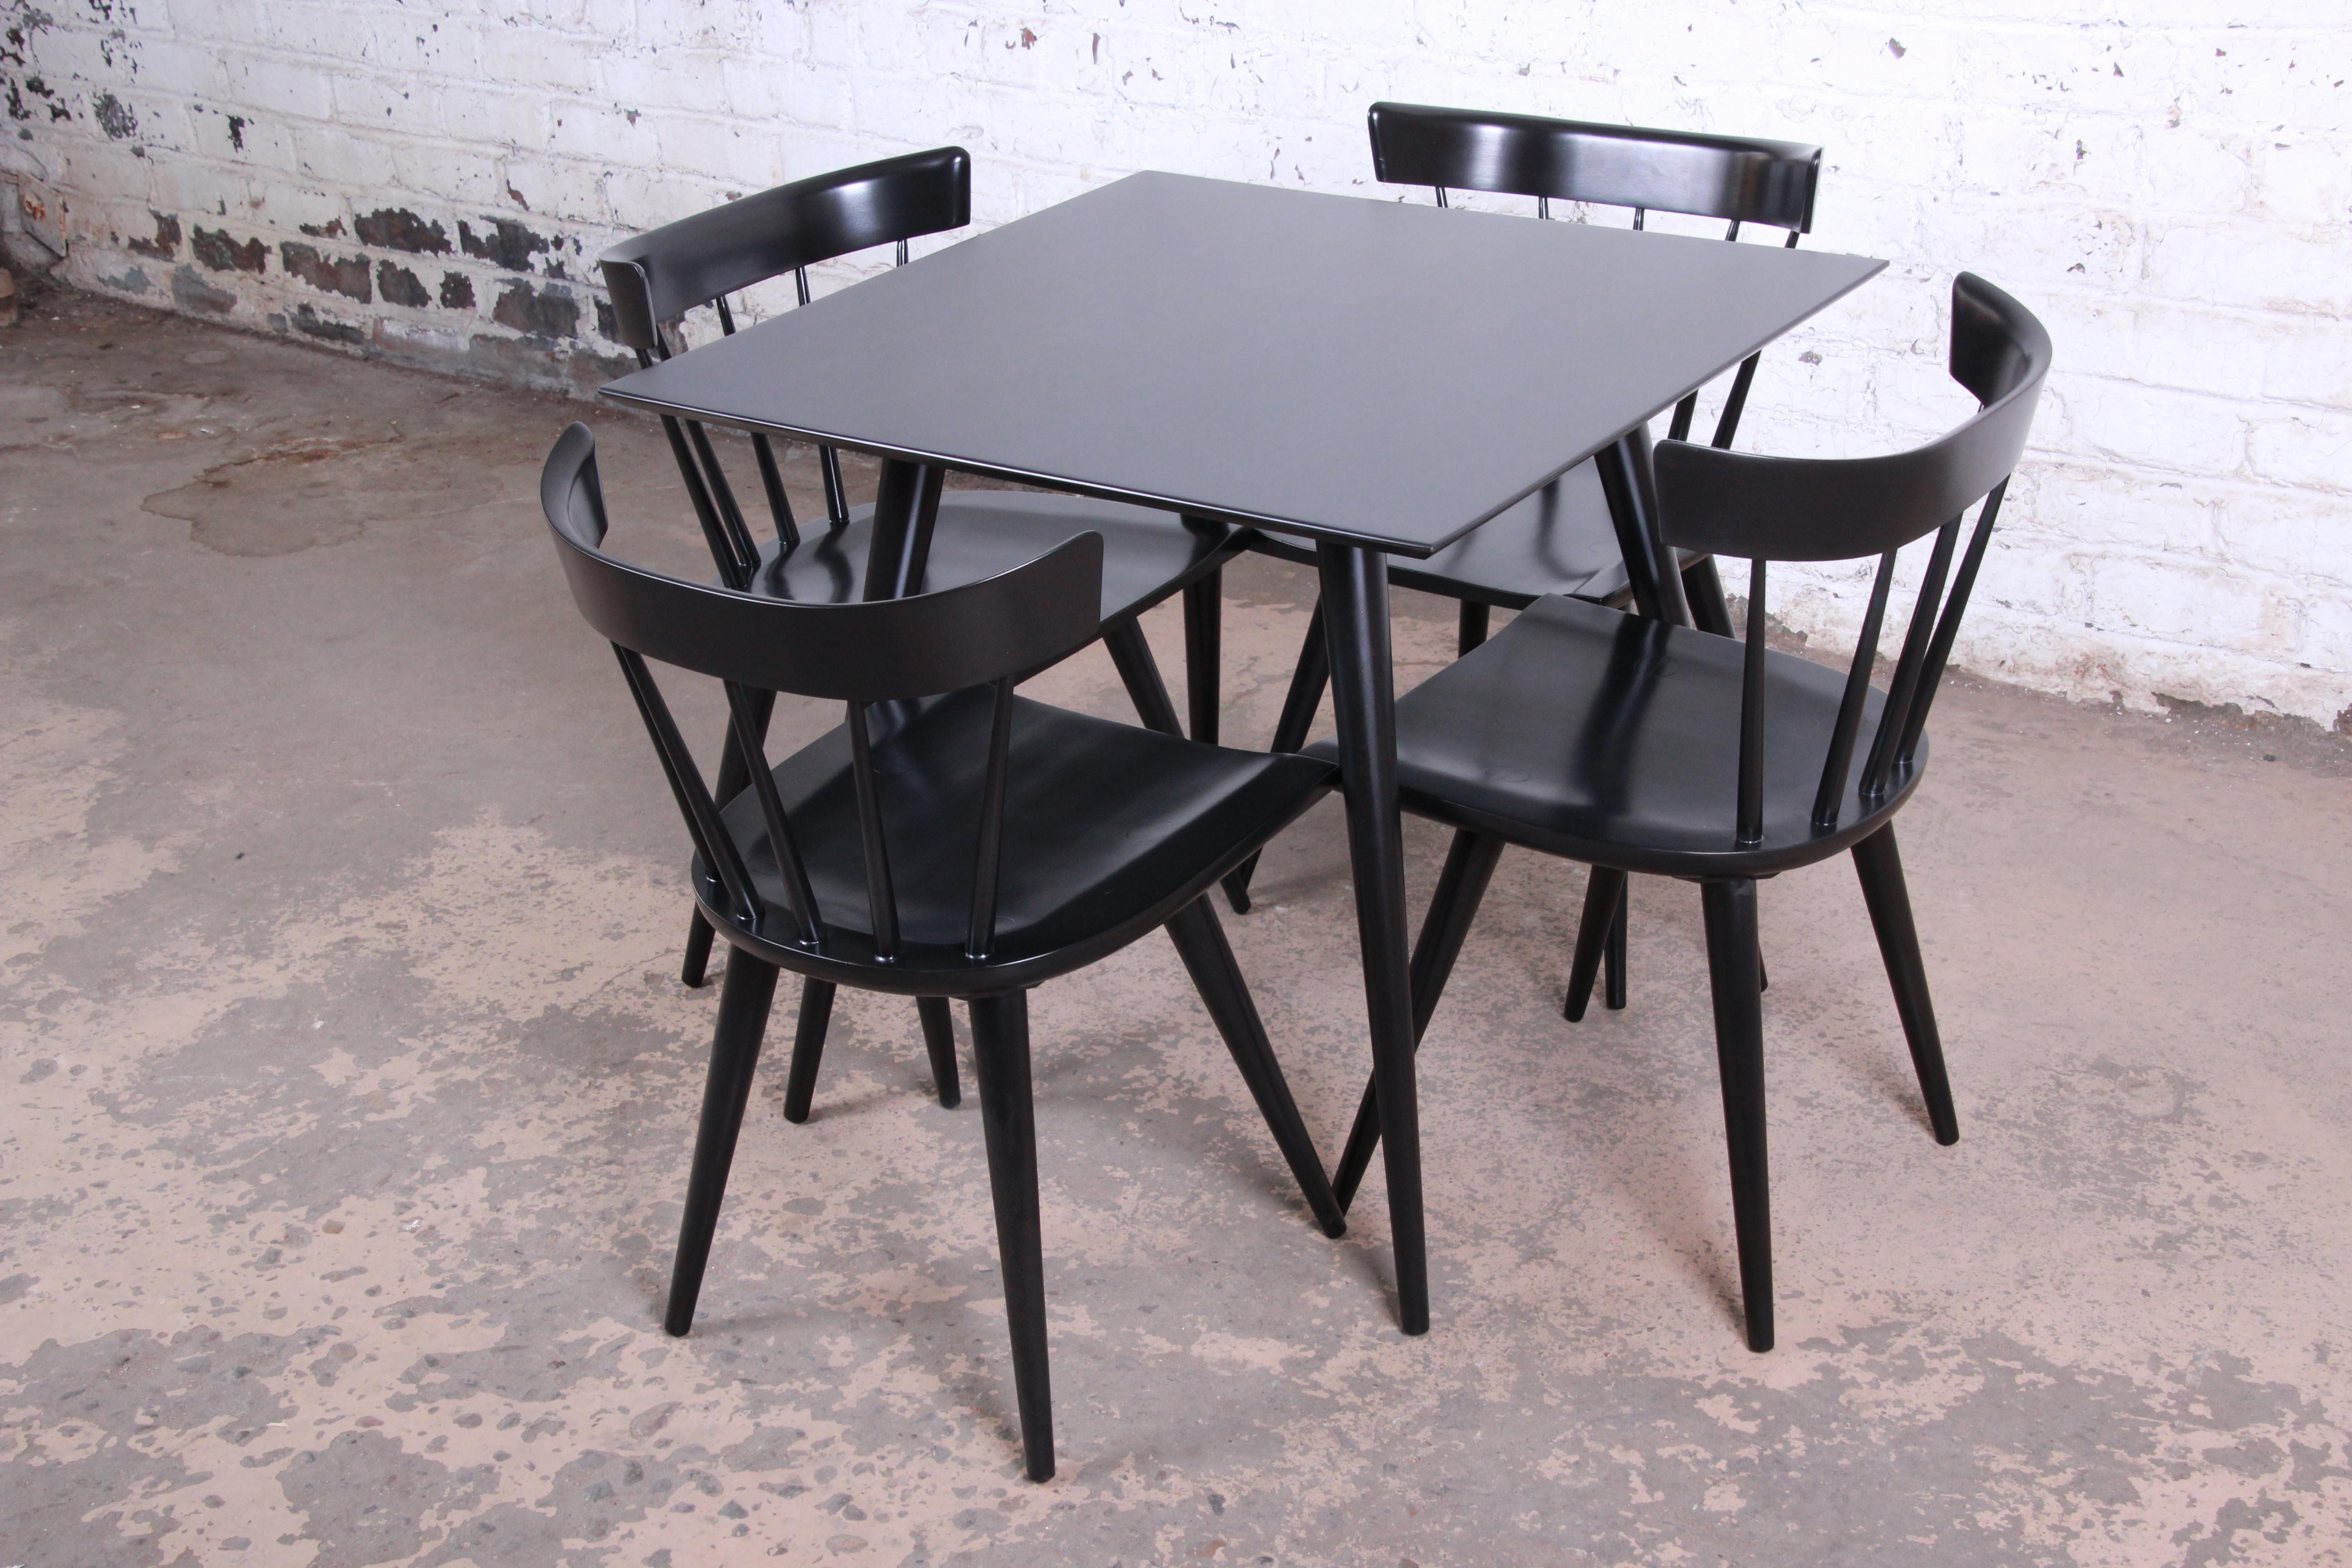 An exceptional Mid-Century Modern square dining or game table with four chairs designed by Paul McCobb for his Planner Group line for Winchendon Furniture. The table features a gorgeous ebonized finish with tall tapered legs, a rare piece from this